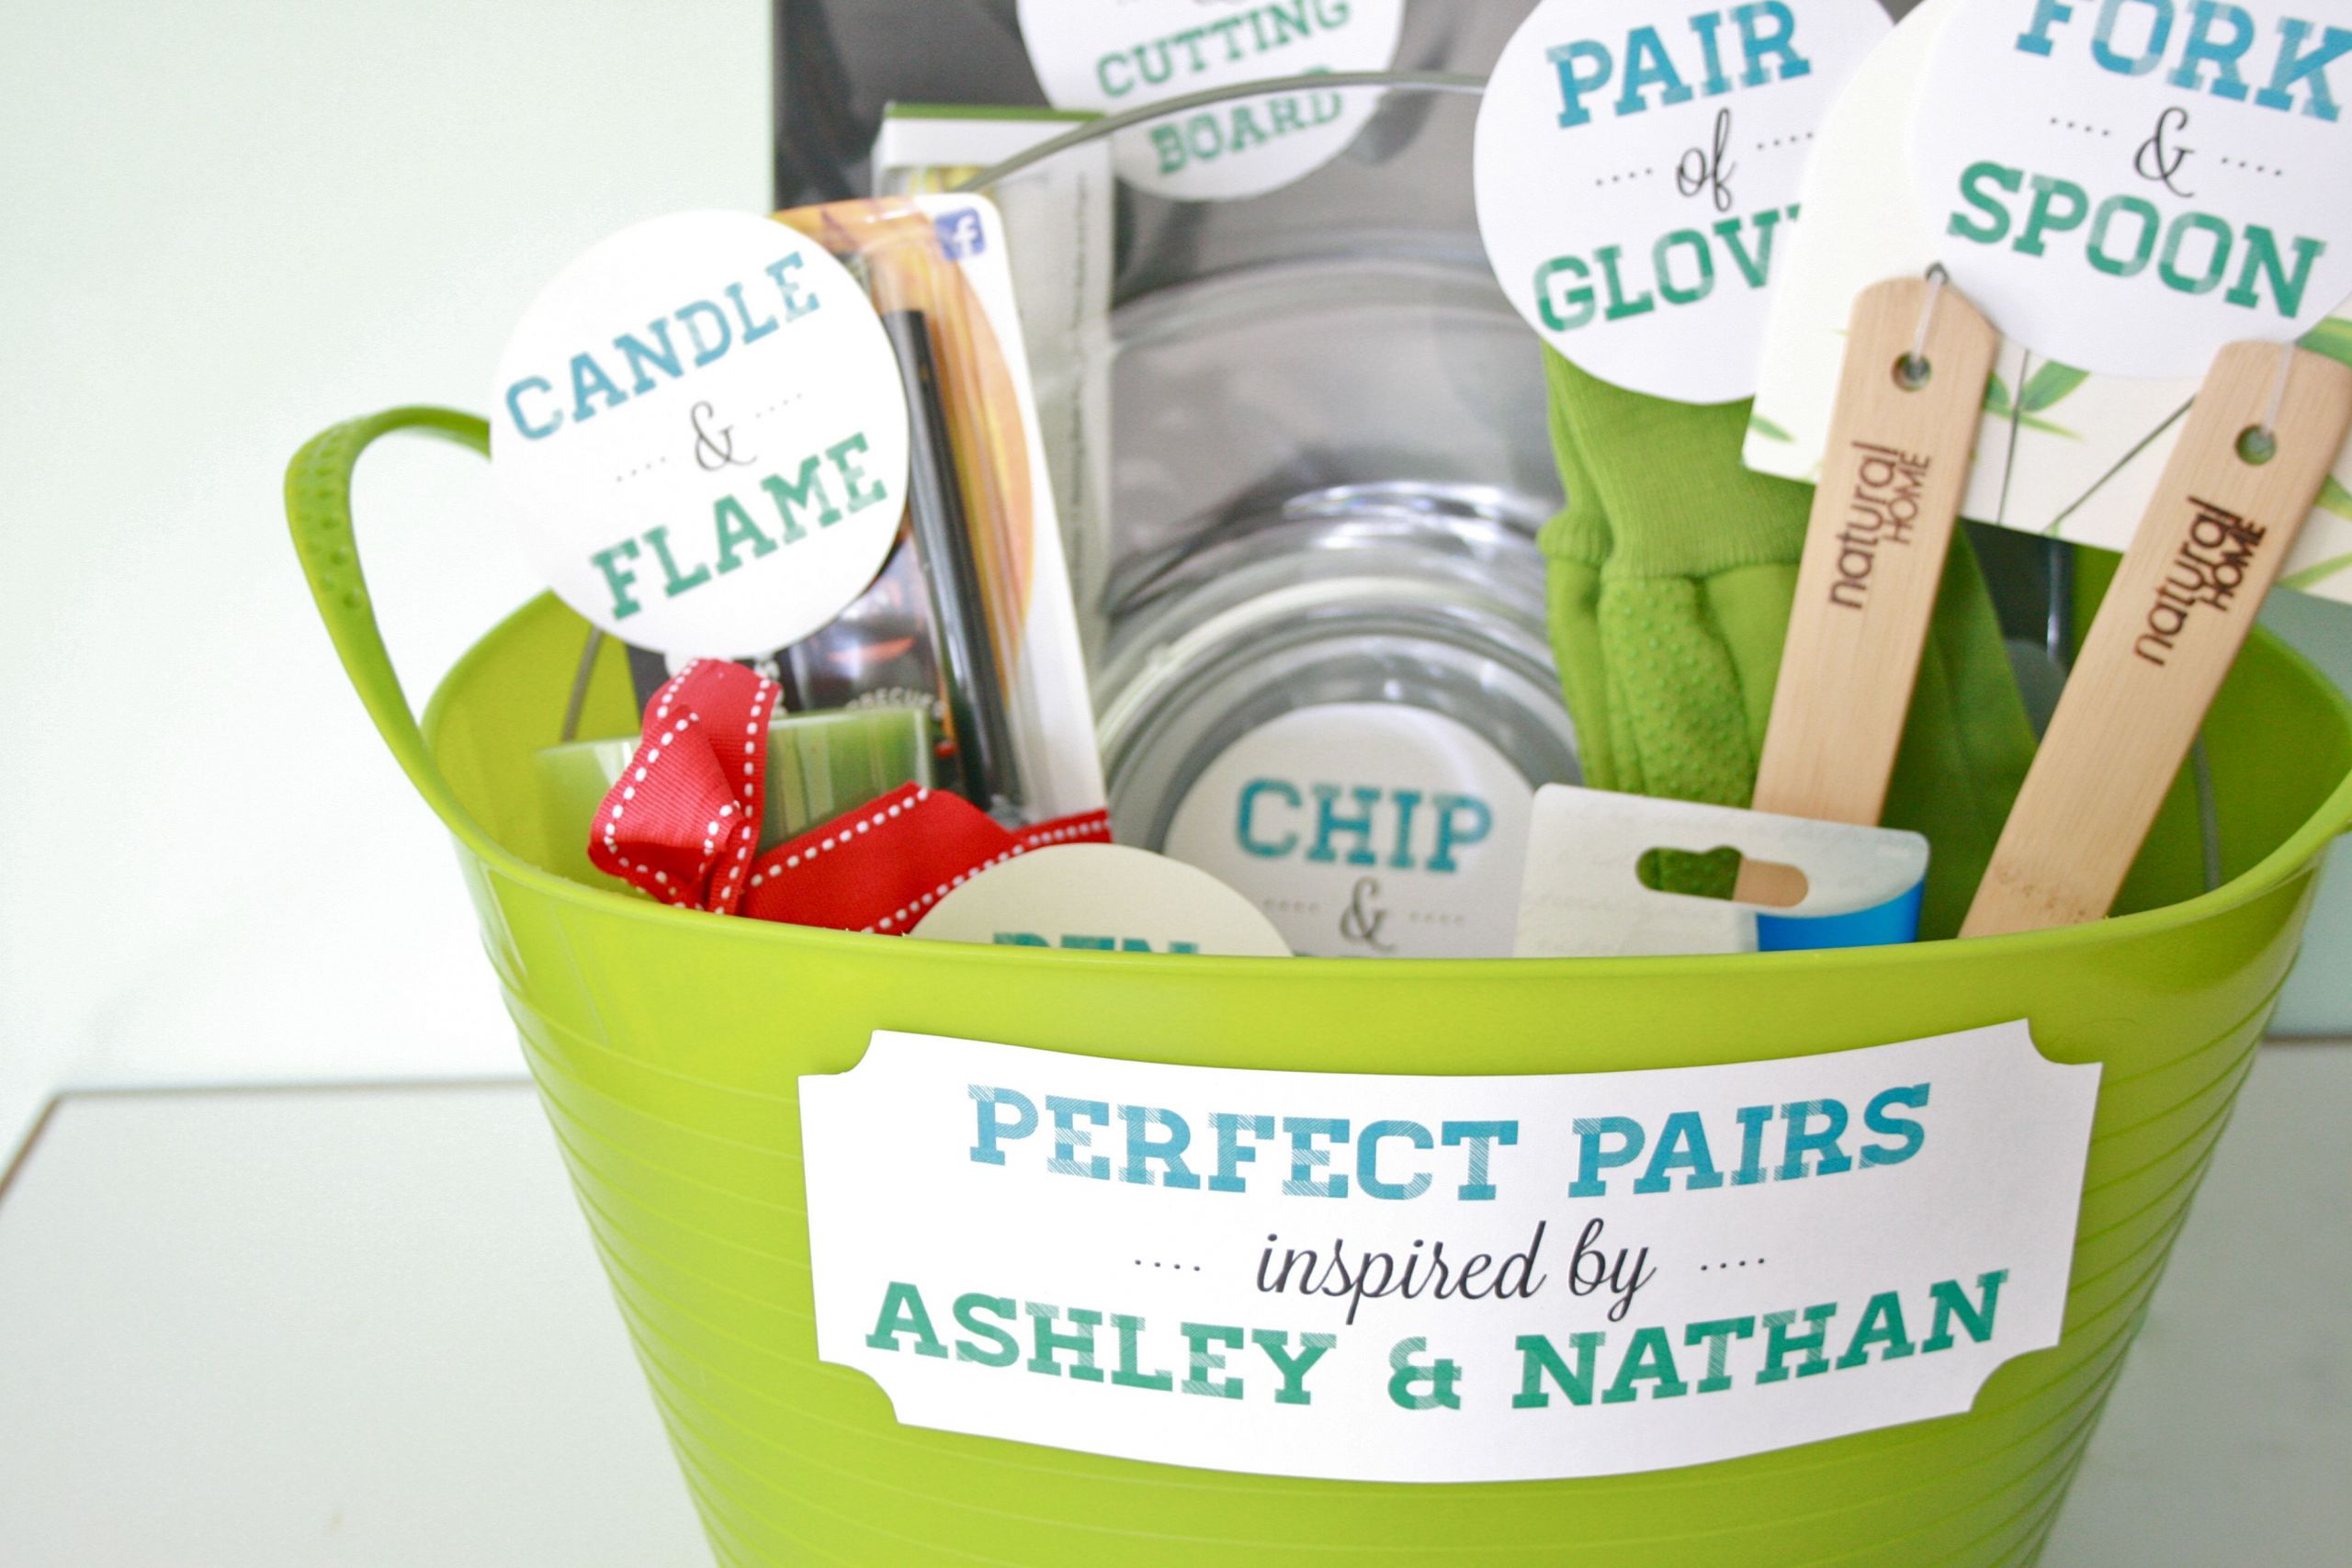 Gift Ideas For Couples Shower
 DIY "Perfect Pairs" Bridal Shower Gift